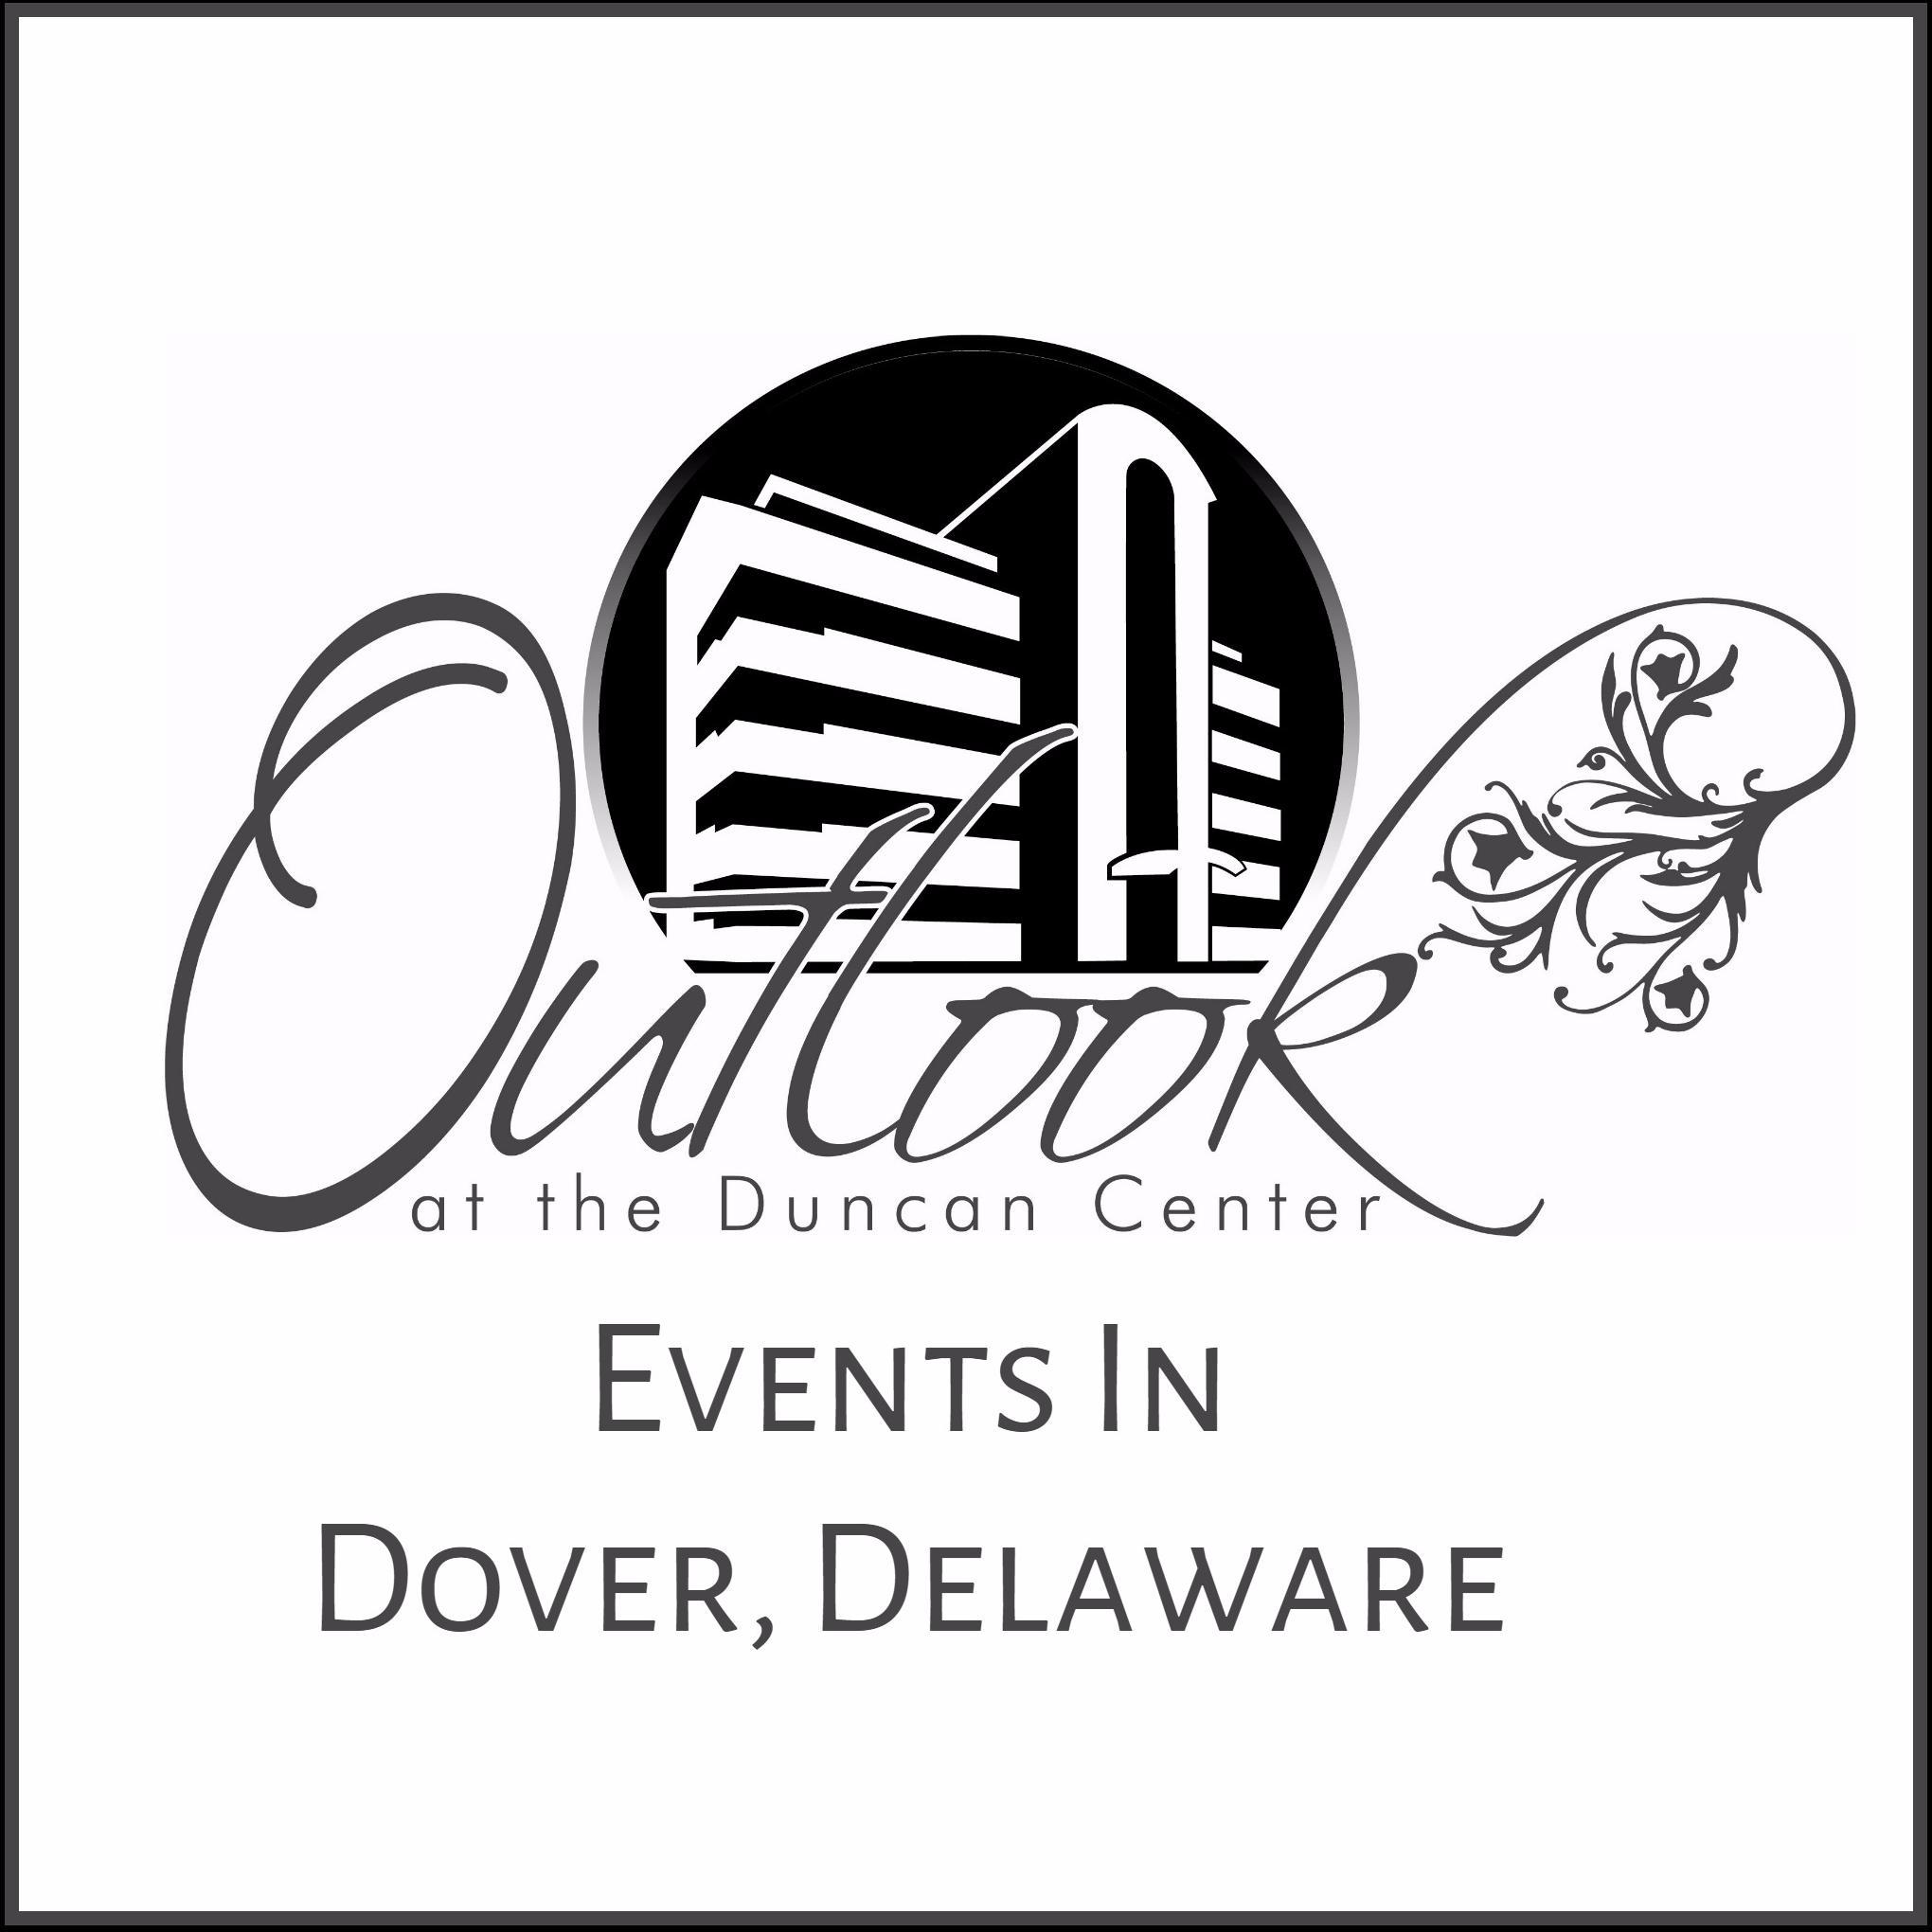 Outlook Events specializes in all types of  unique occasions | social events | #weddings | corporate functions | three rooms to choose from! | (302) 674-3031